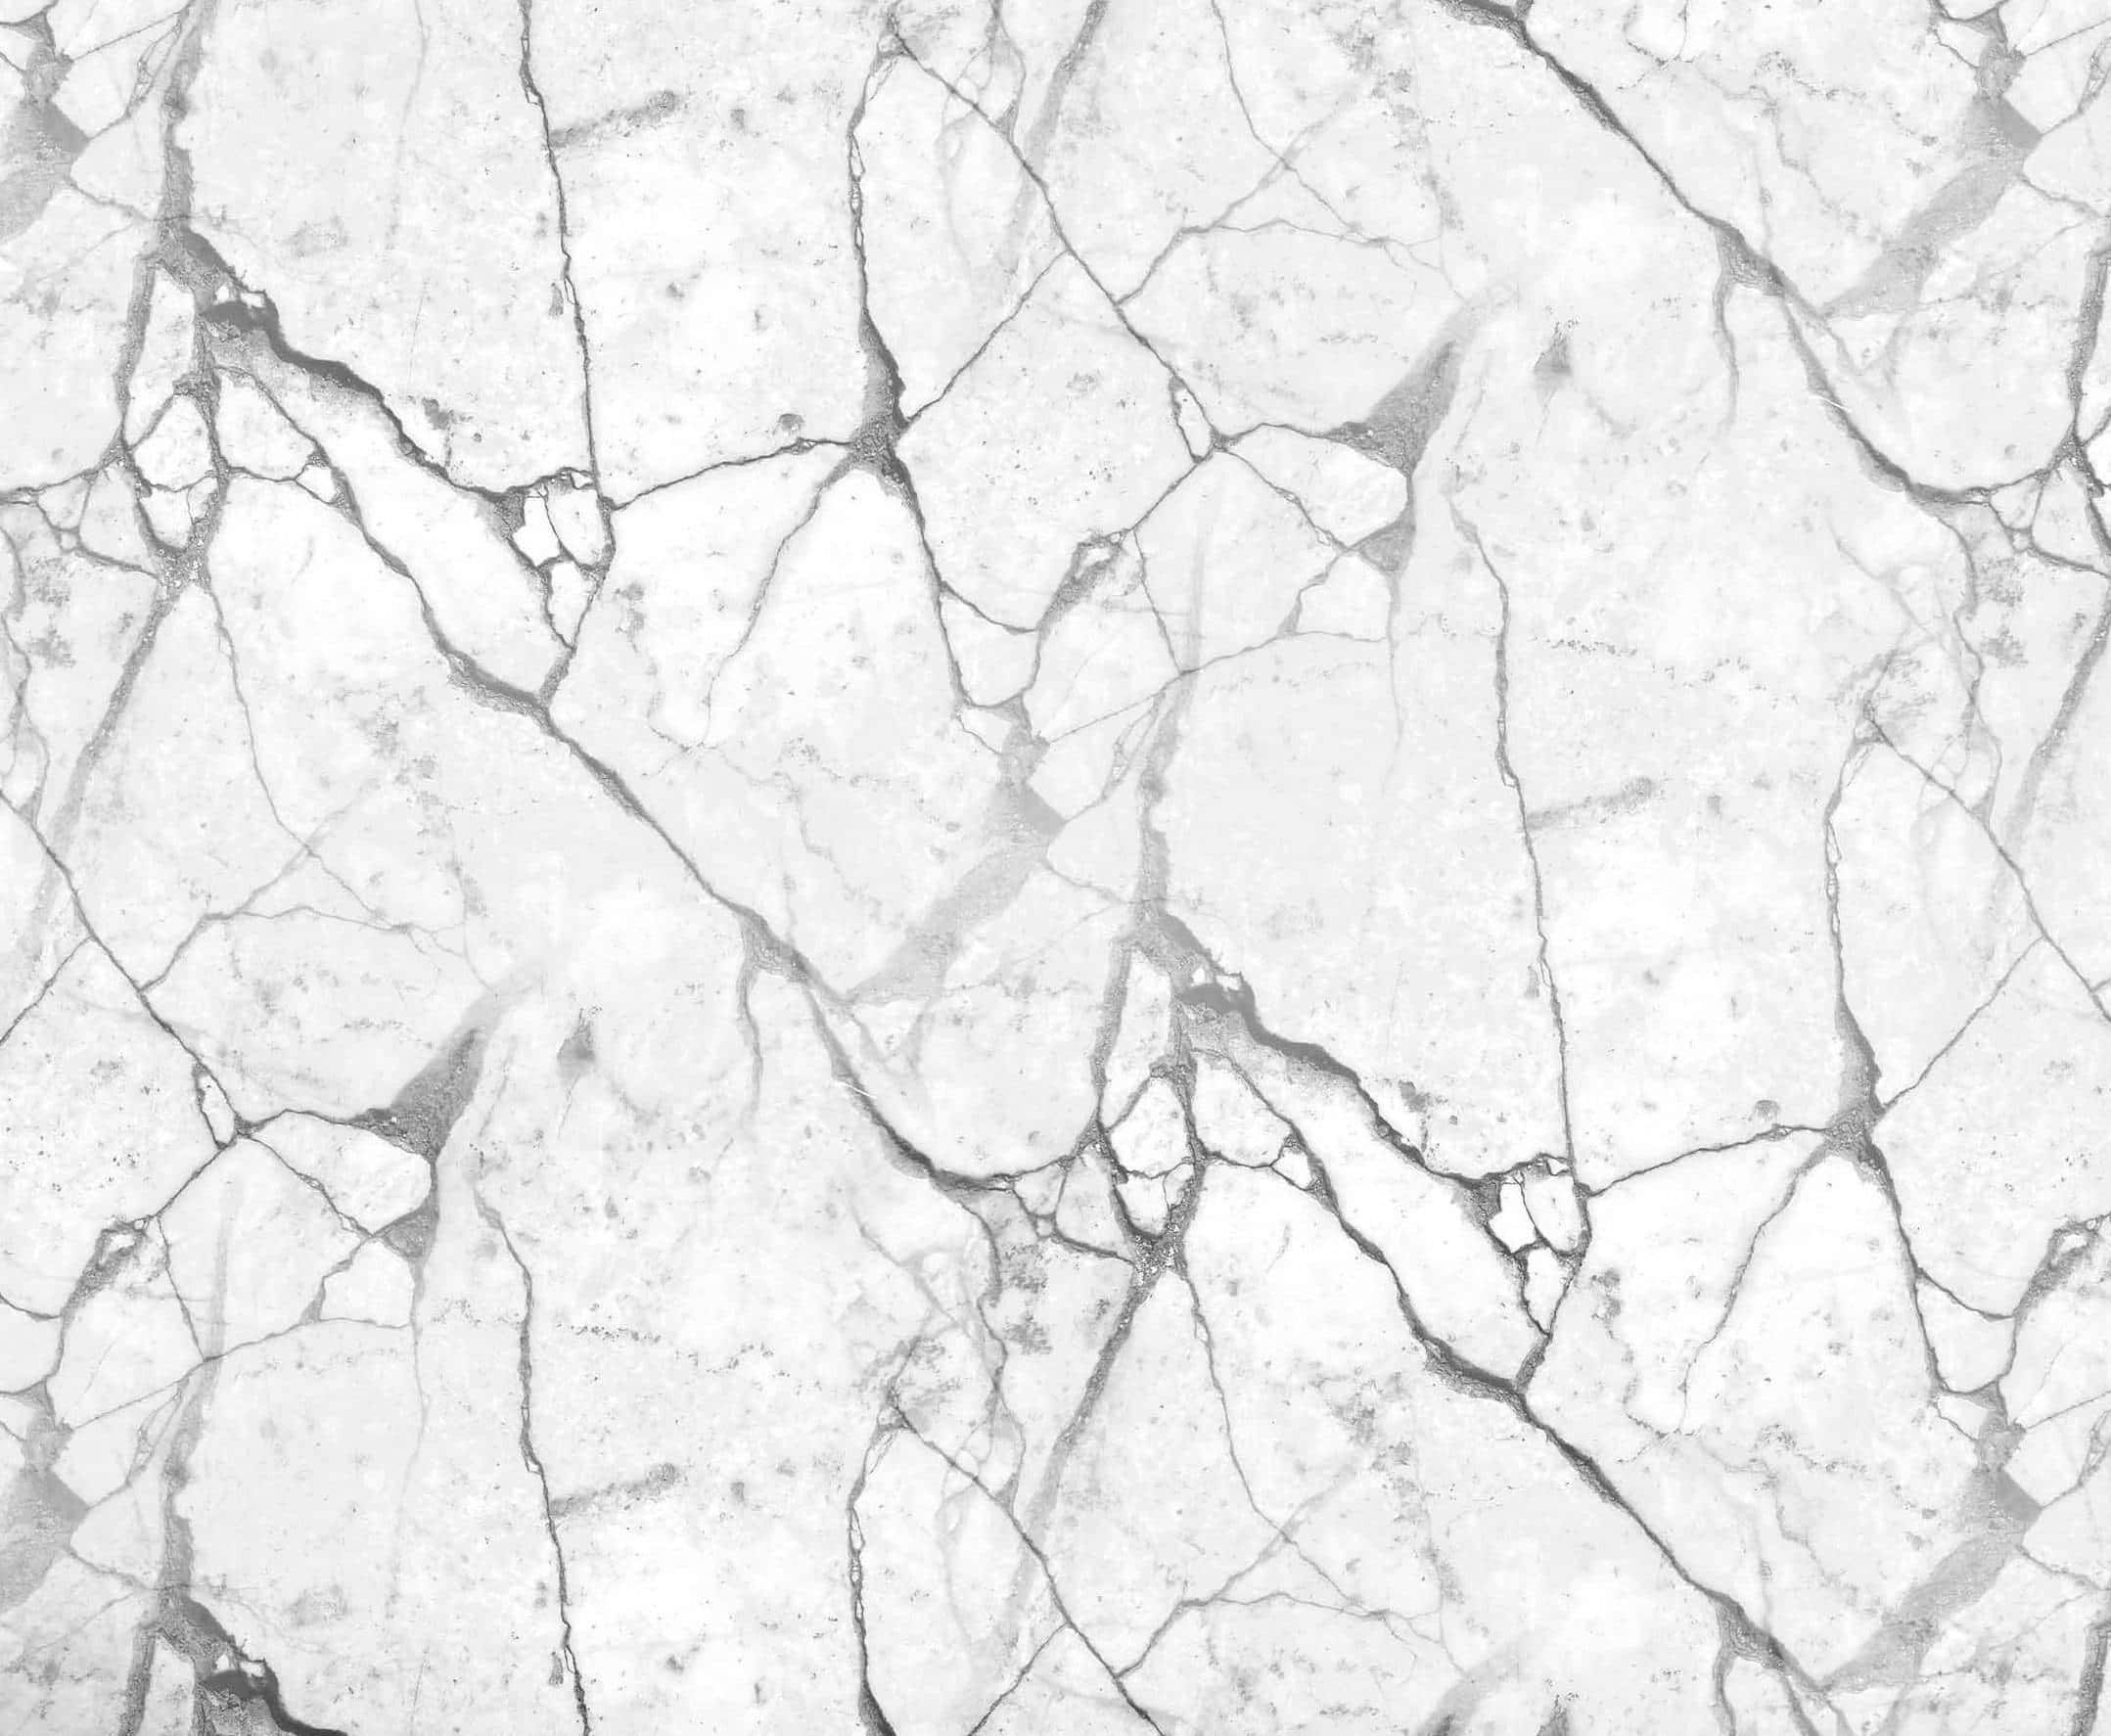 Marble Texture Cracked Black Lines Design Picture